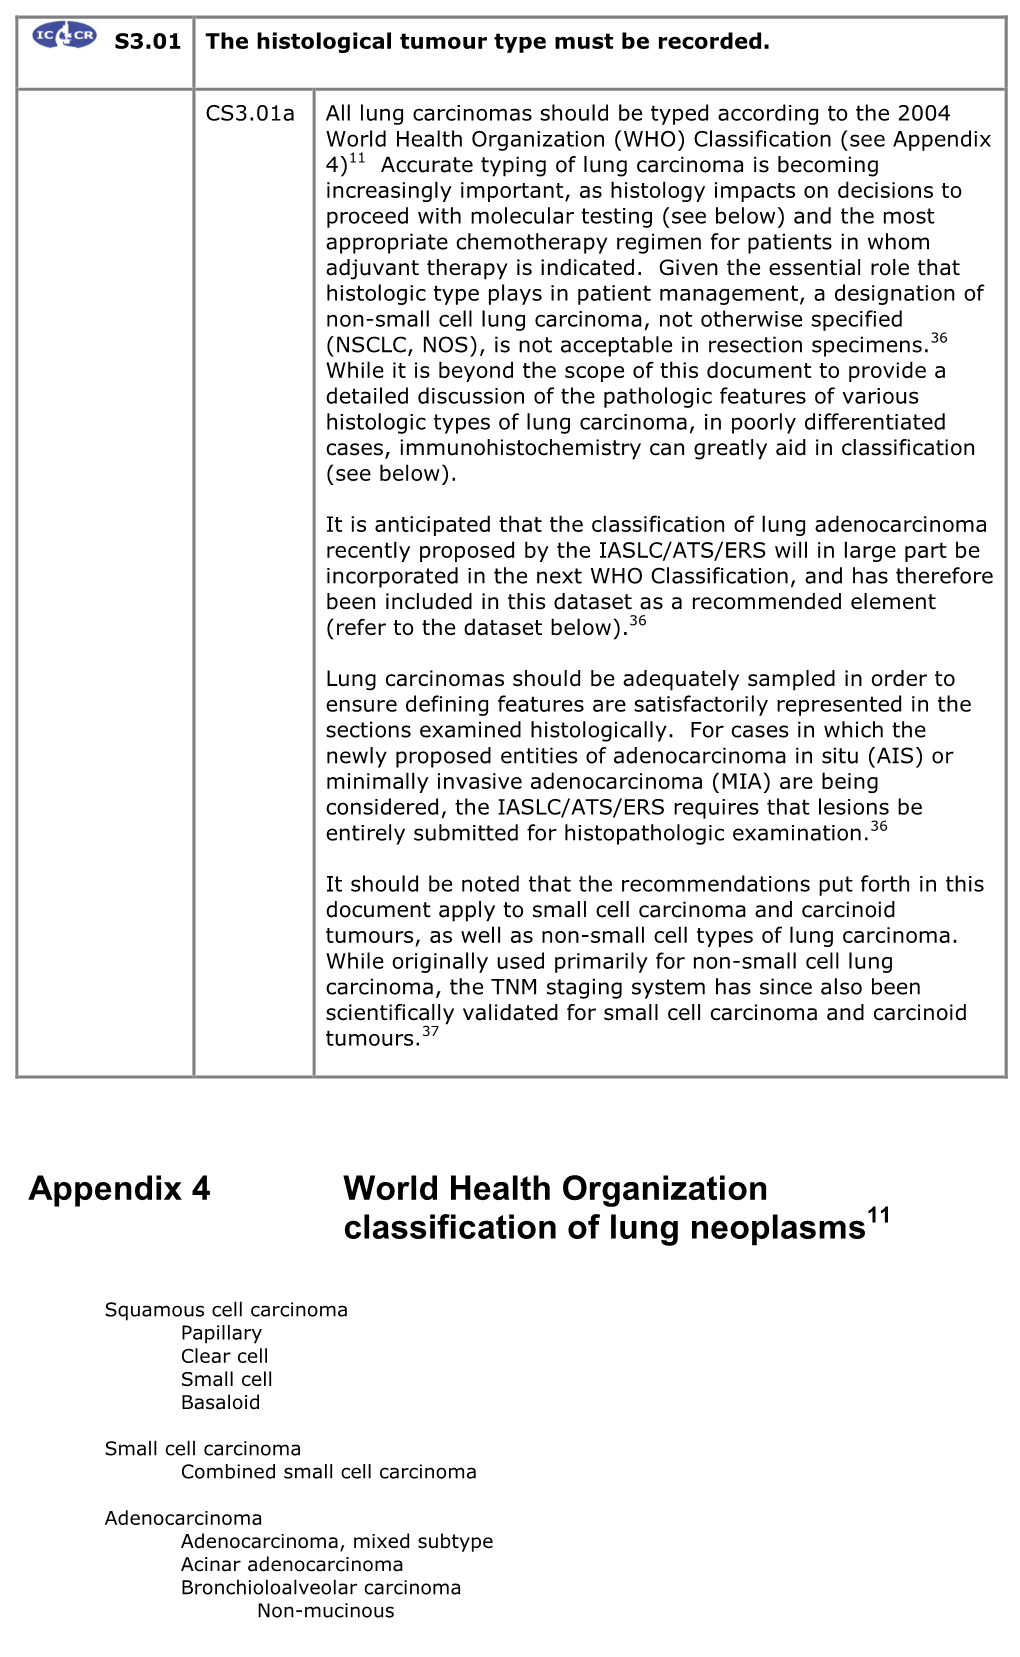 Appendix 4 World Health Organization Classification of Lung Neoplasms11